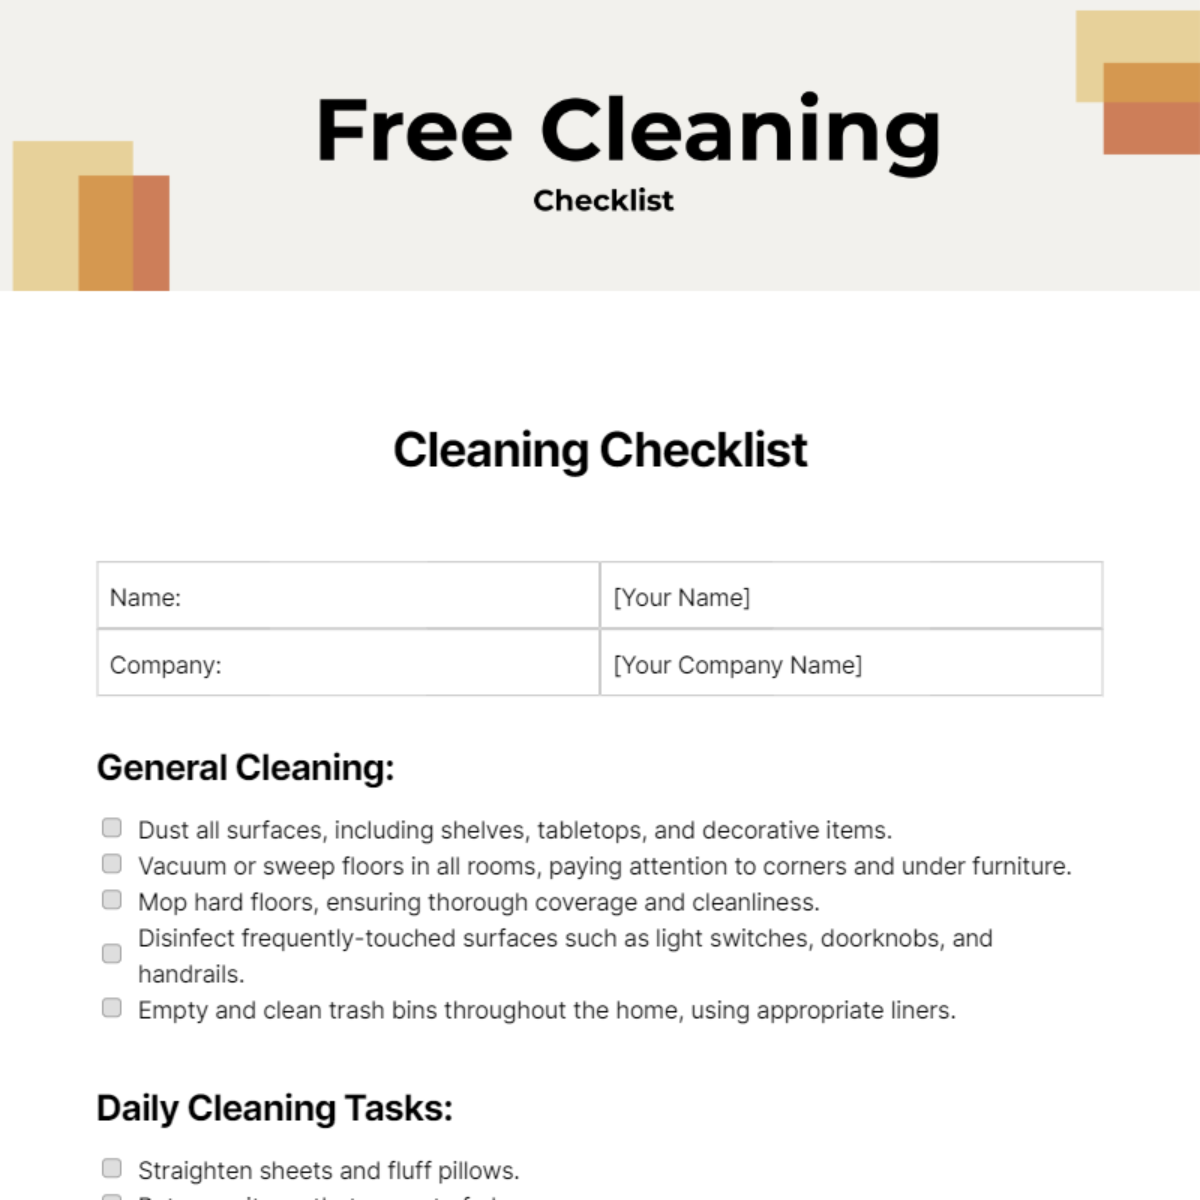 Cleaning Checklist Template